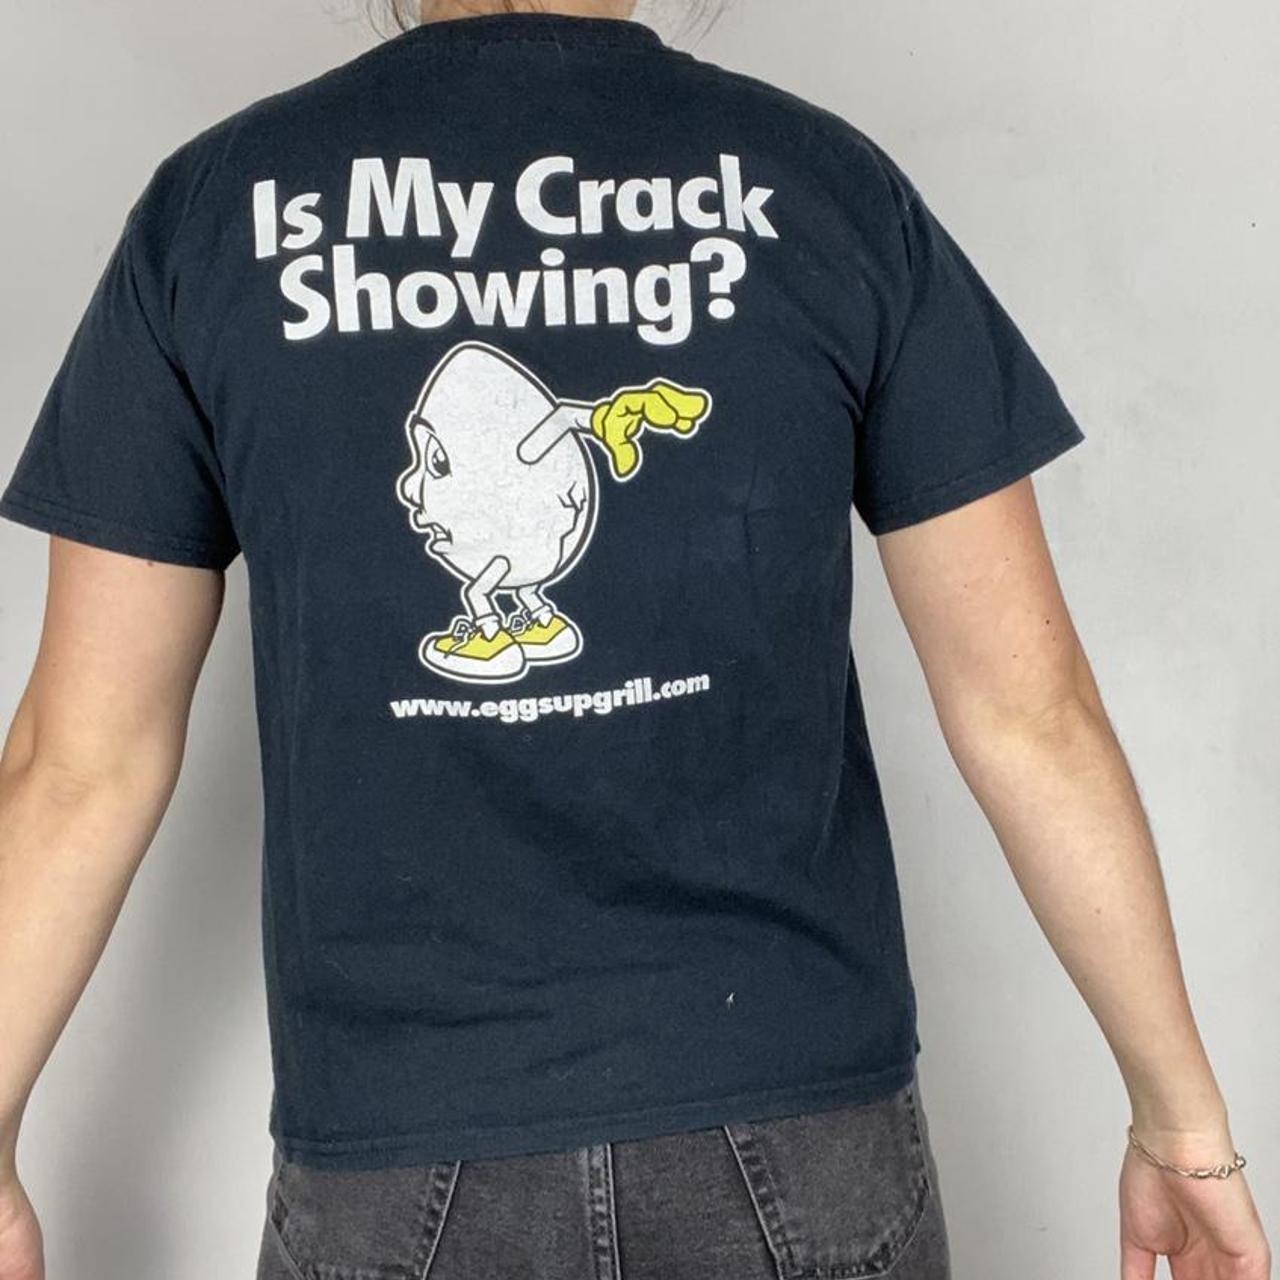 Product Image 1 - Funny Tee🥚
This tee is so